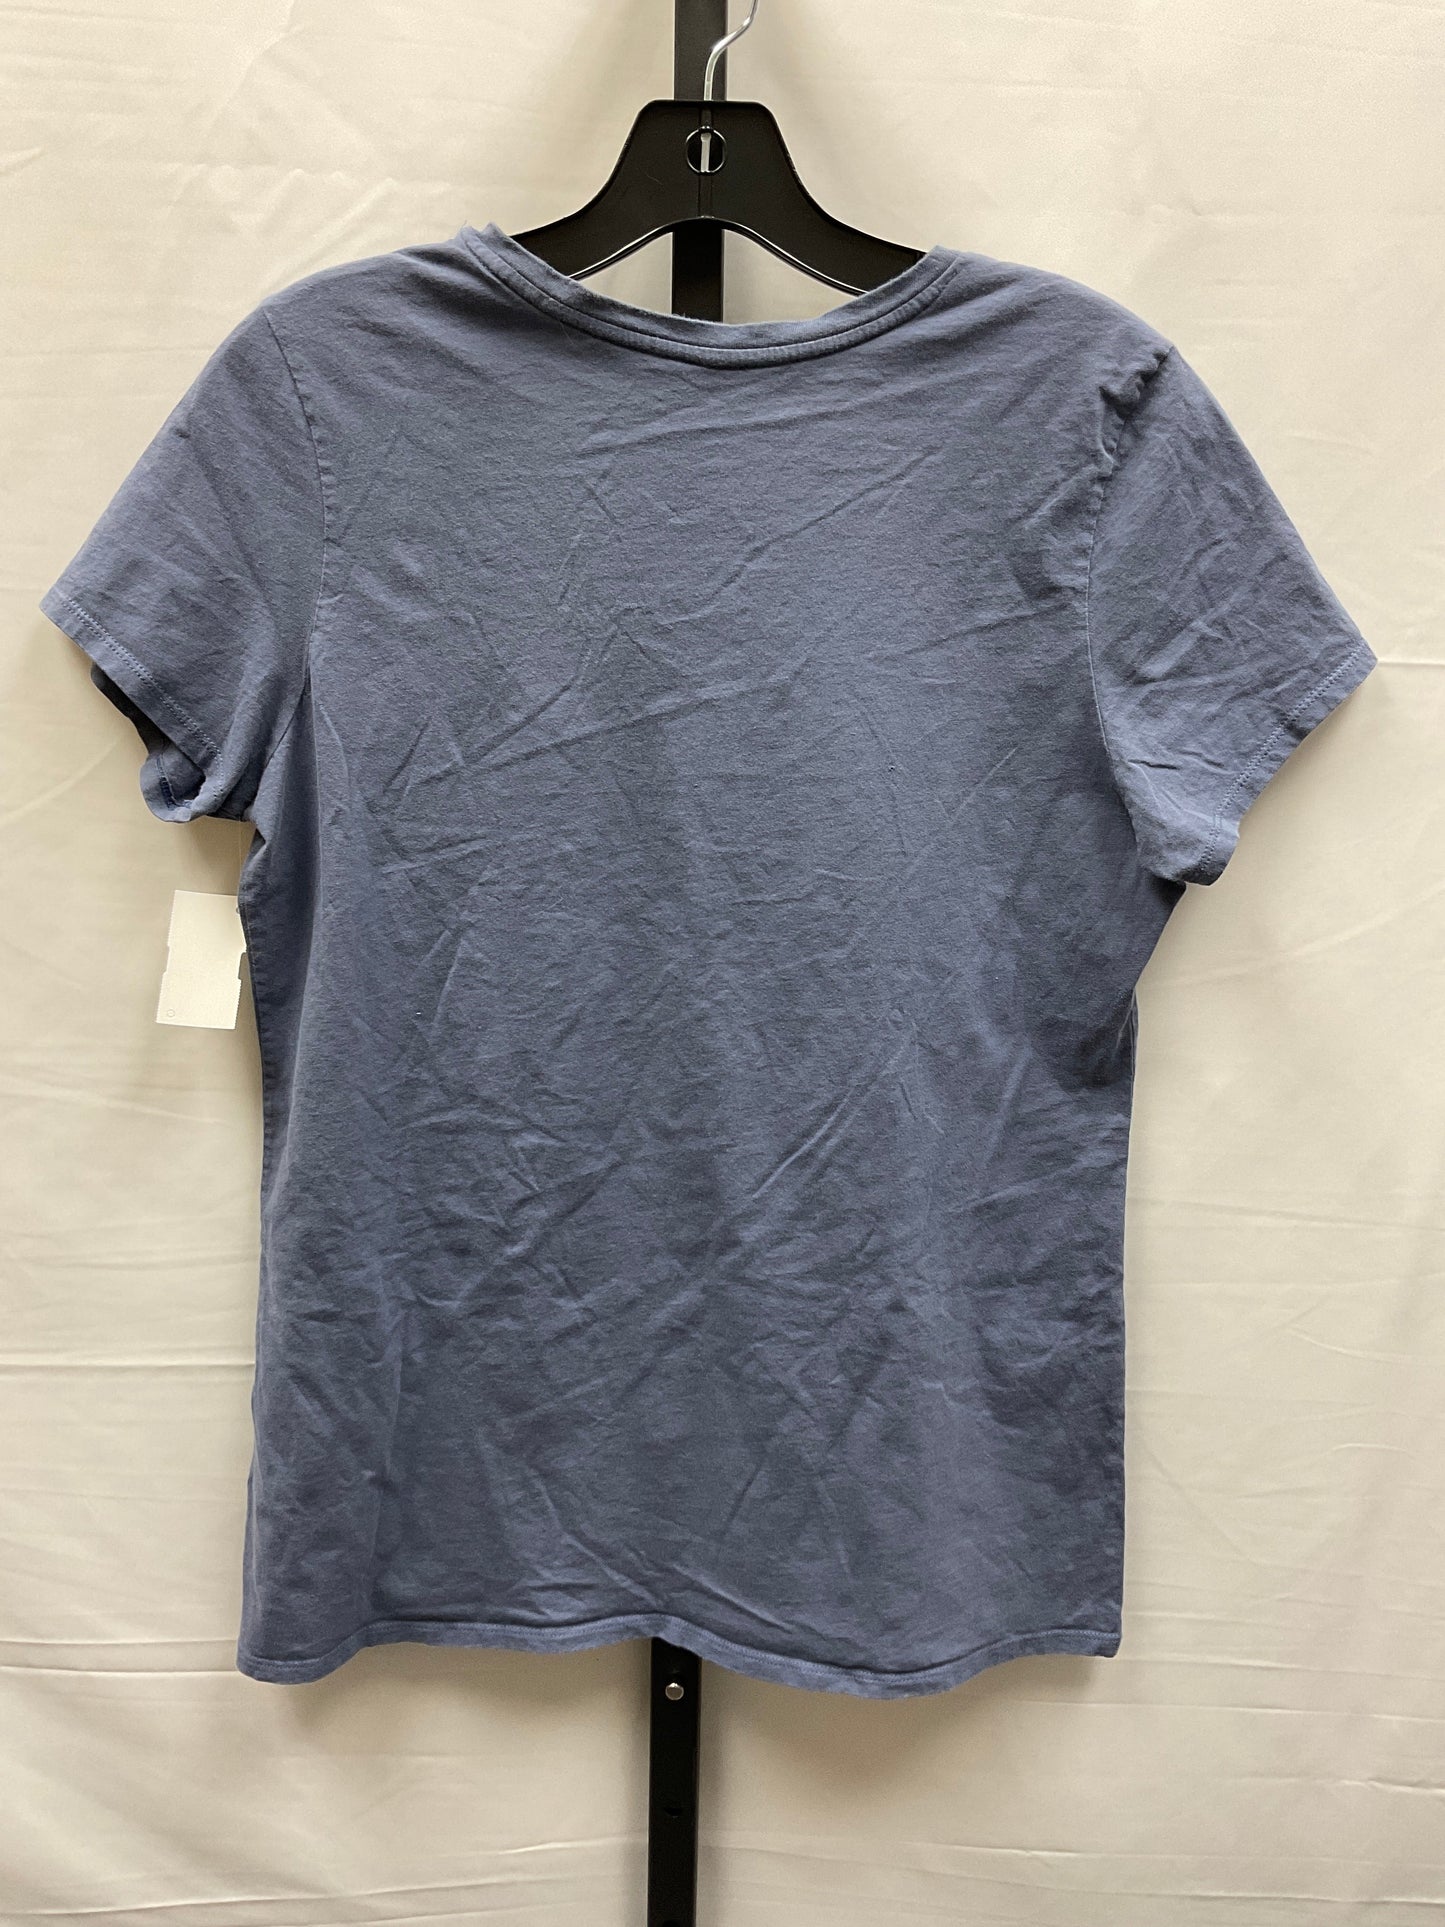 Blue Top Short Sleeve Patagonia, Size L